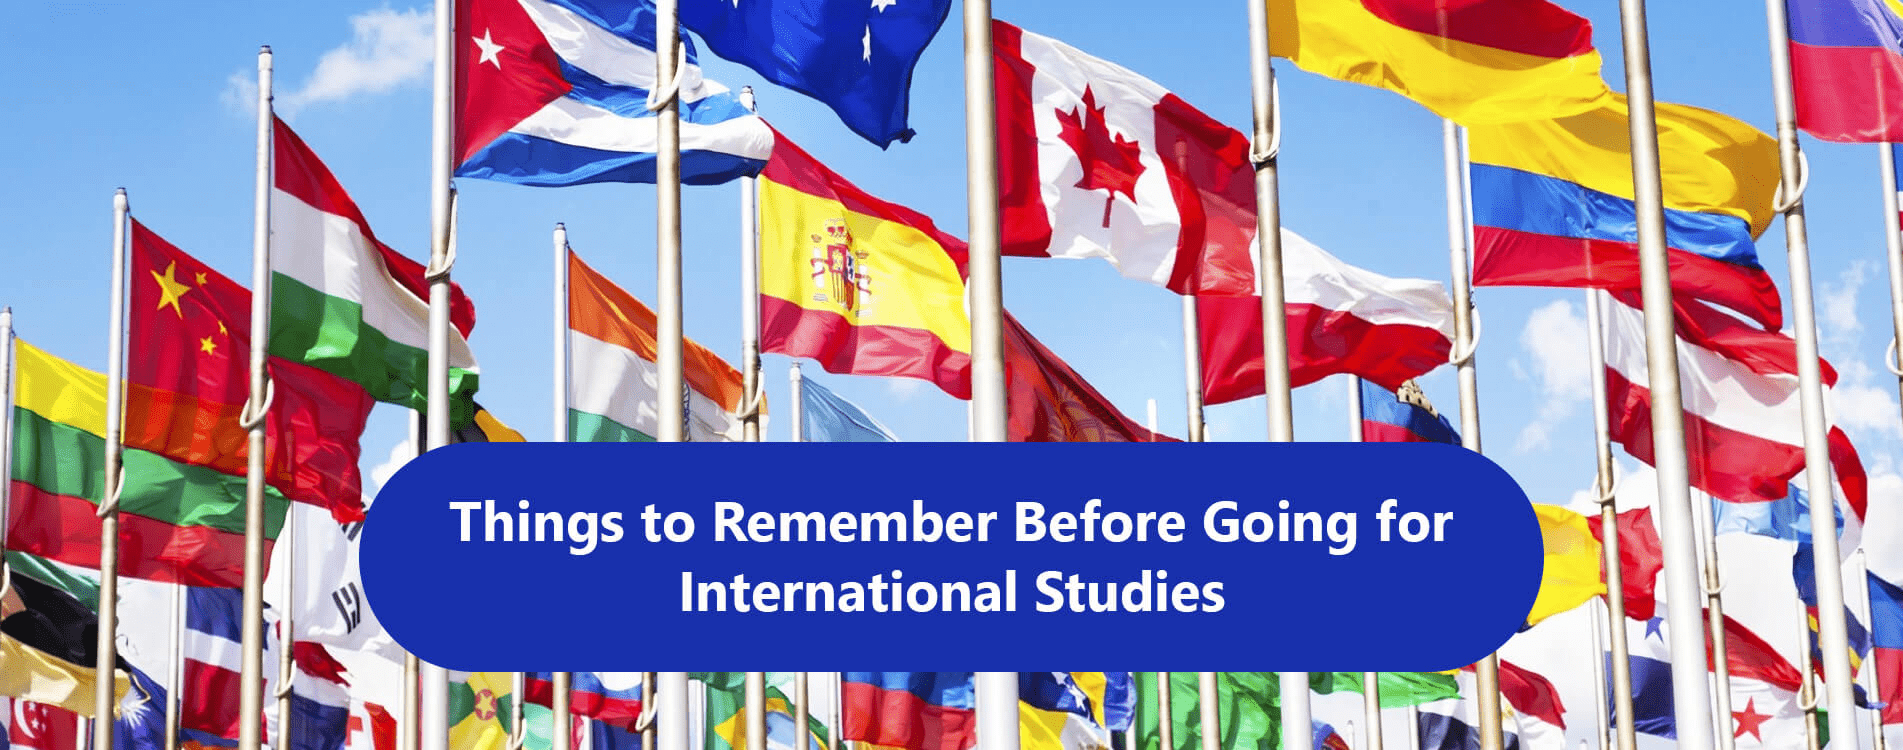 Things to Remember Before Going for International Studies